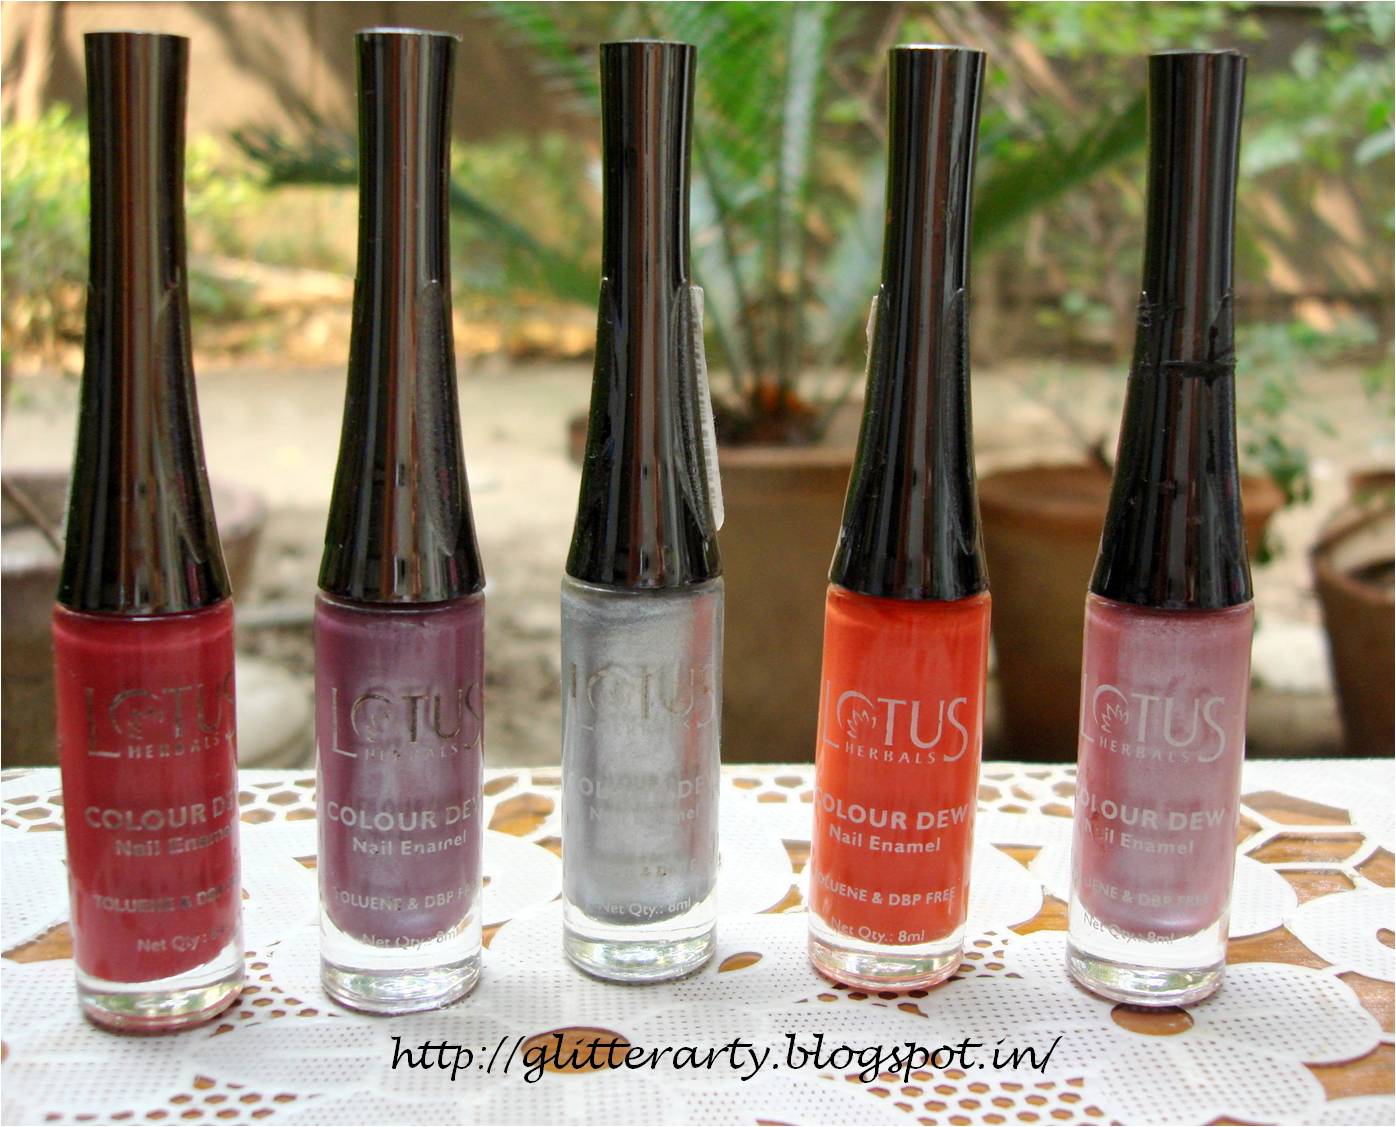 5 Lotus Herbals Color Dew Nail Enamel Review & Swatches